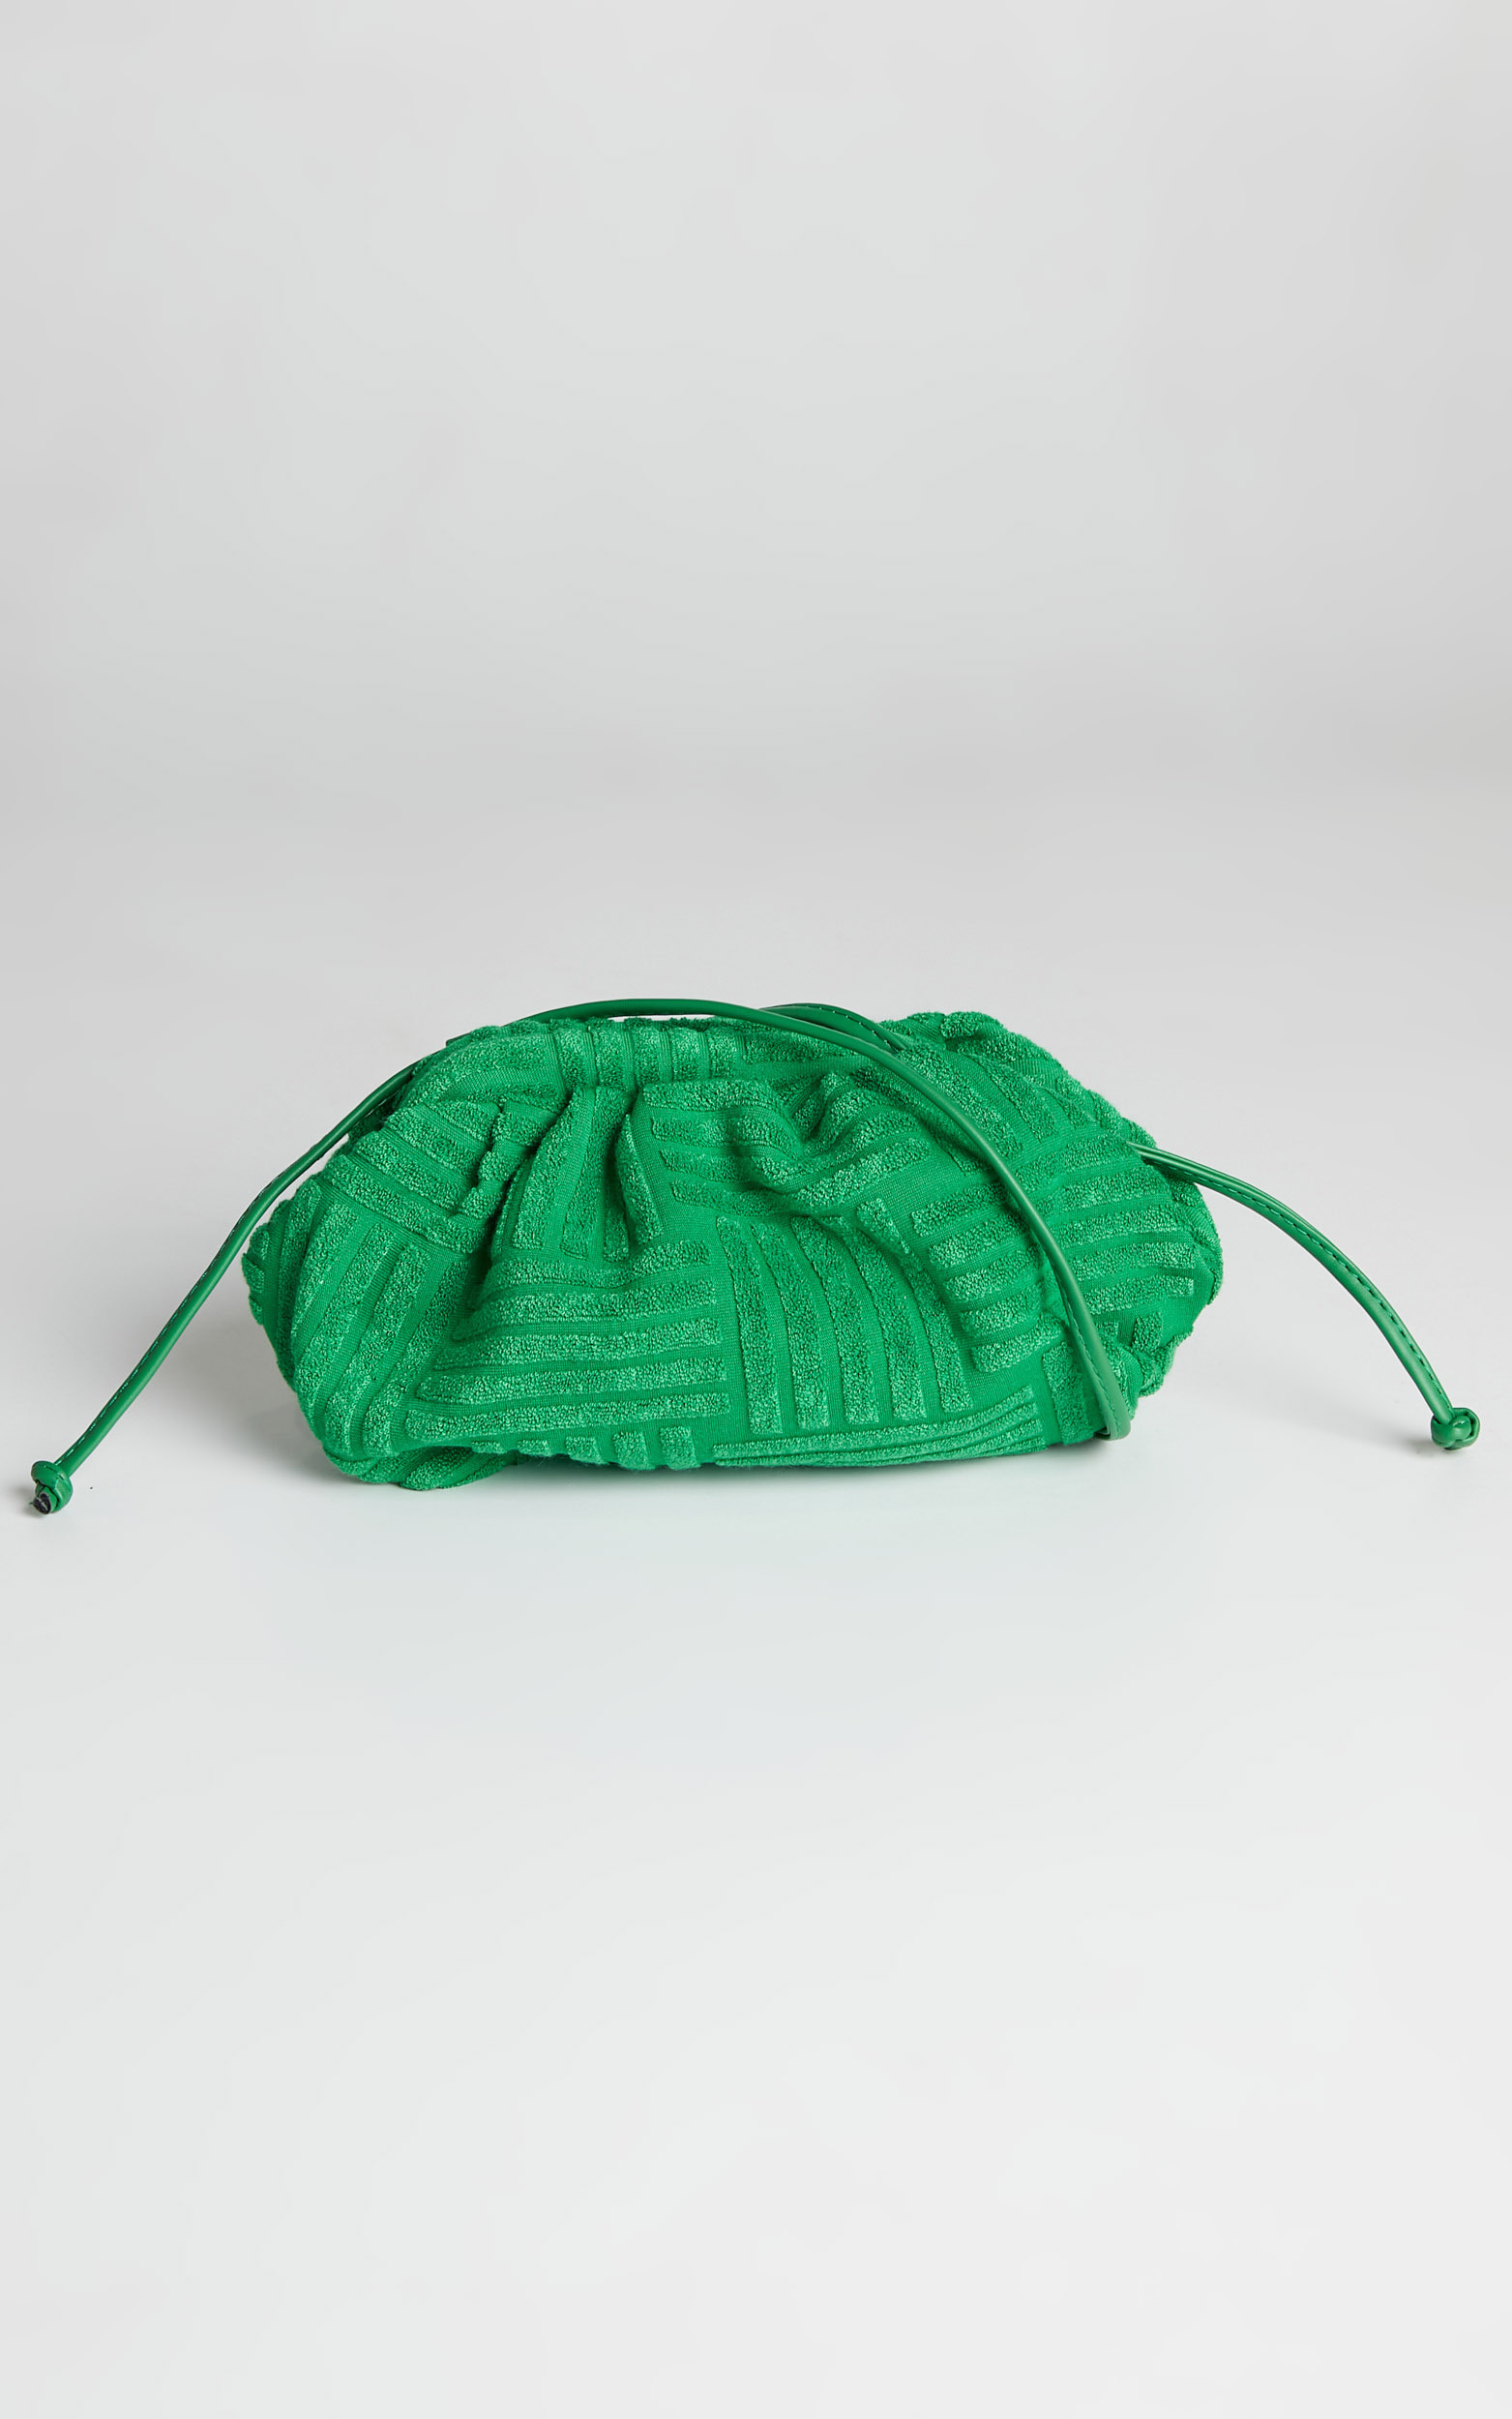 Romy Towelling Bag in Green - NoSize, GRN1, hi-res image number null